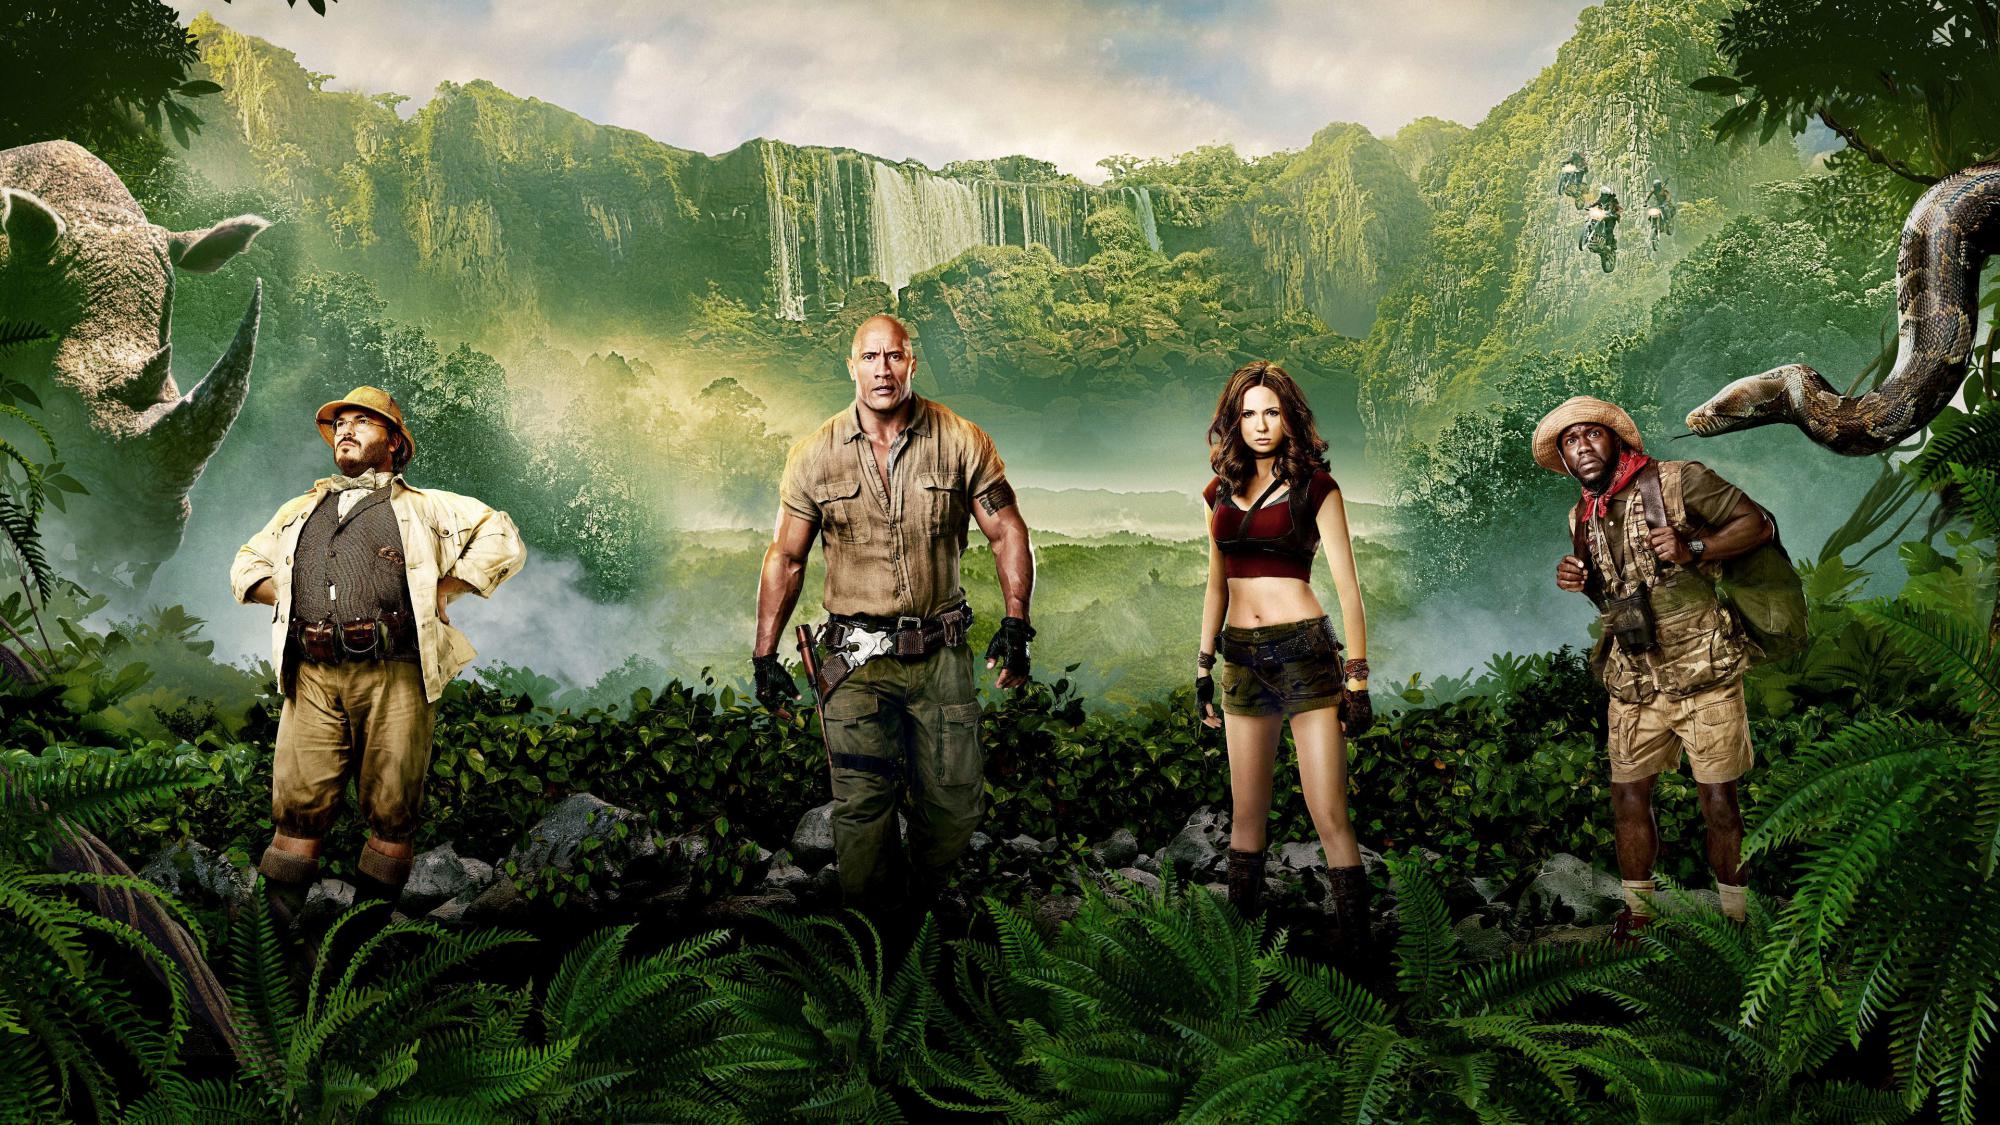 Backdrop Image for Jumanji: Welcome to the Jungle